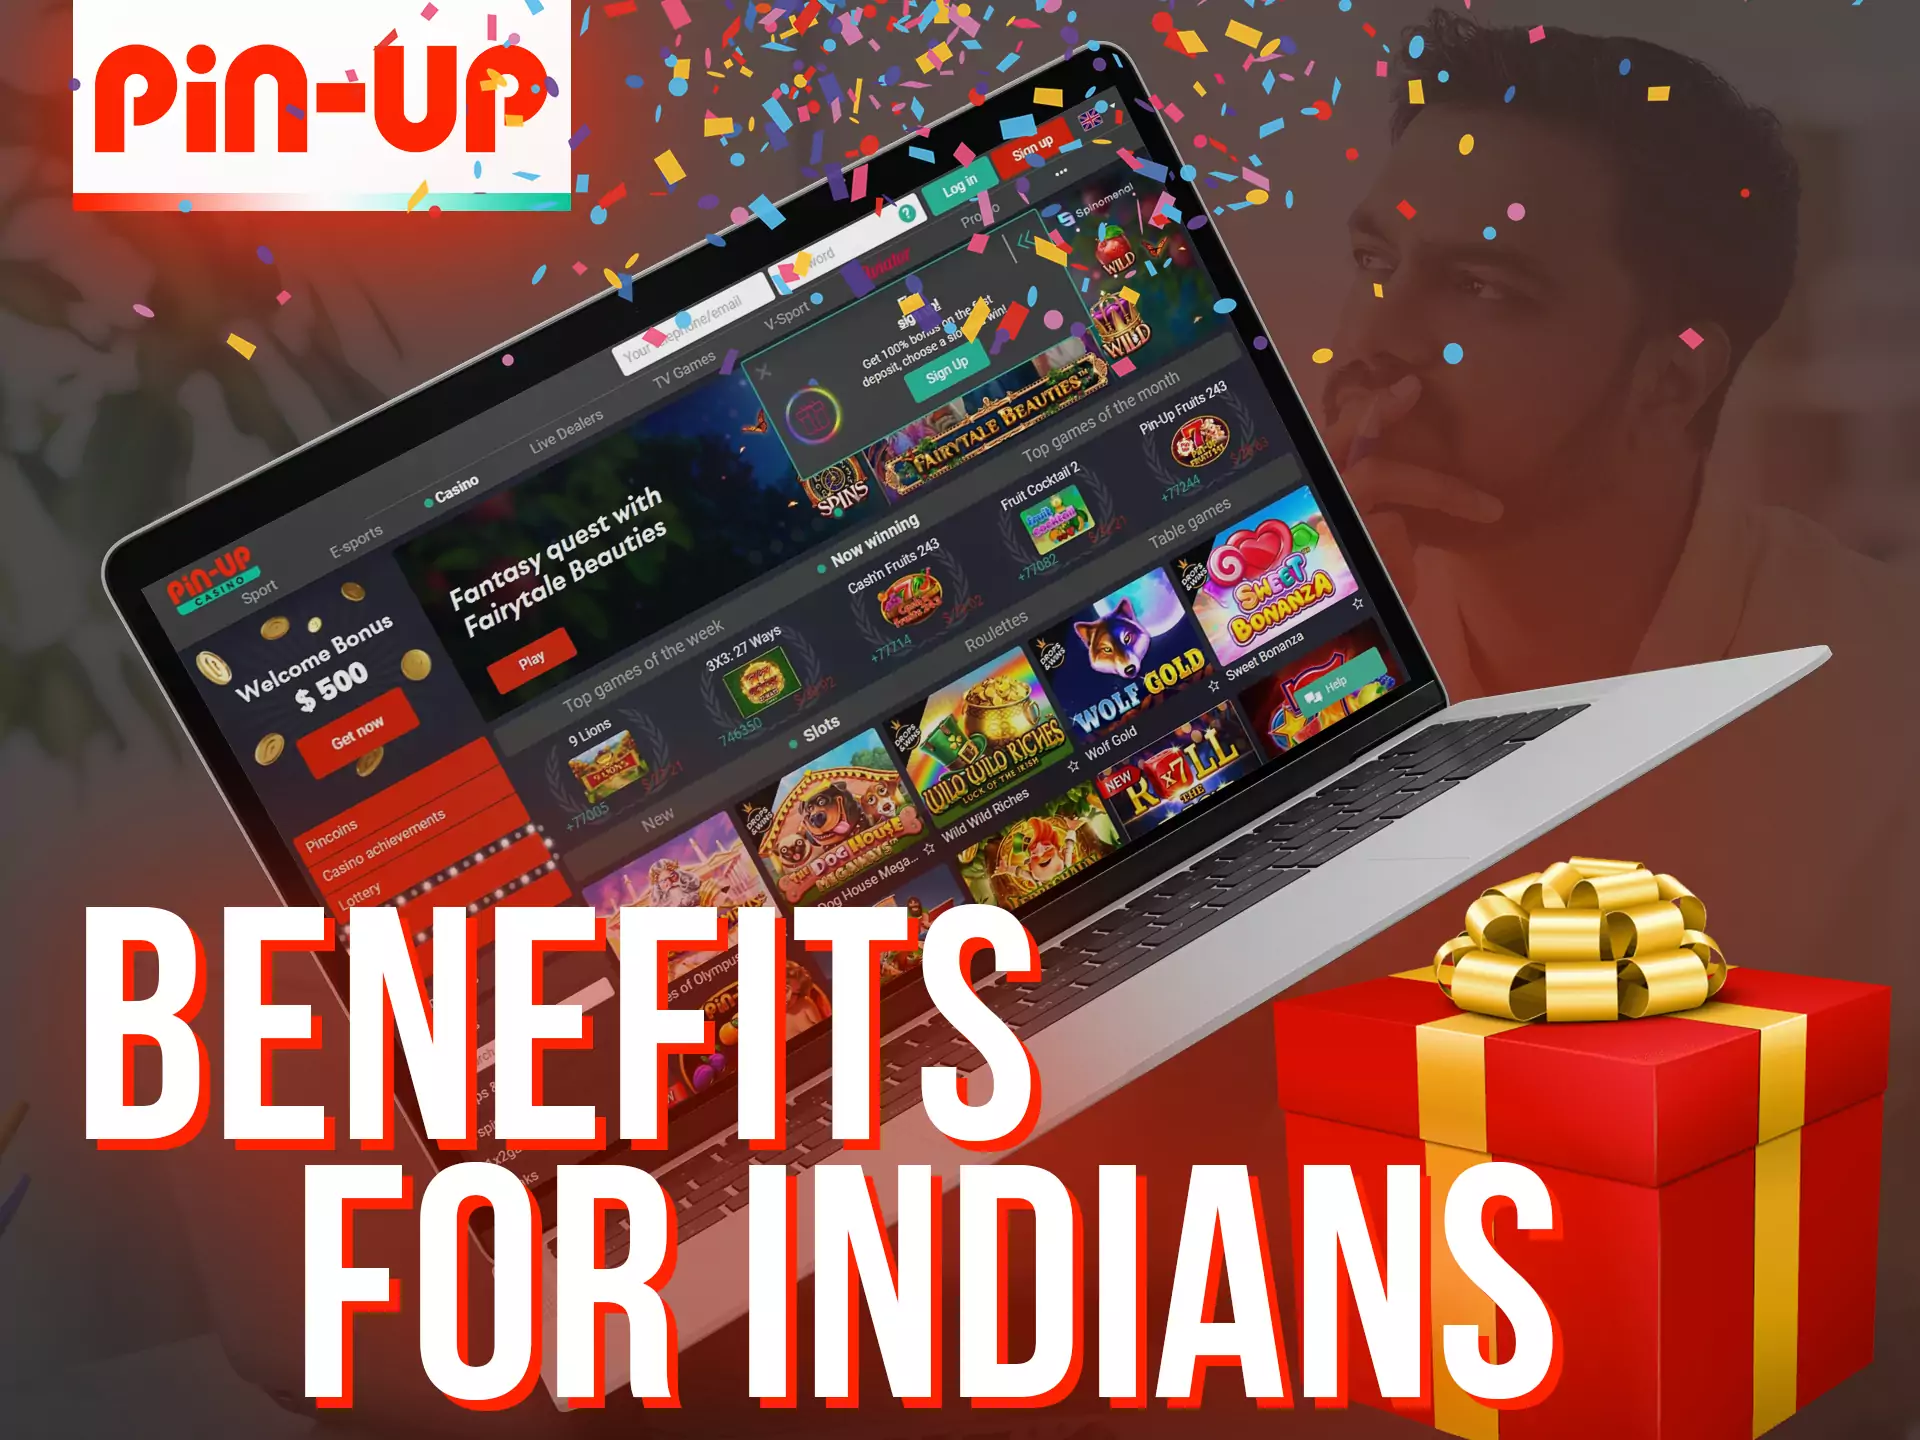 Pin-up gives special bonuses and benefits to Indian players.